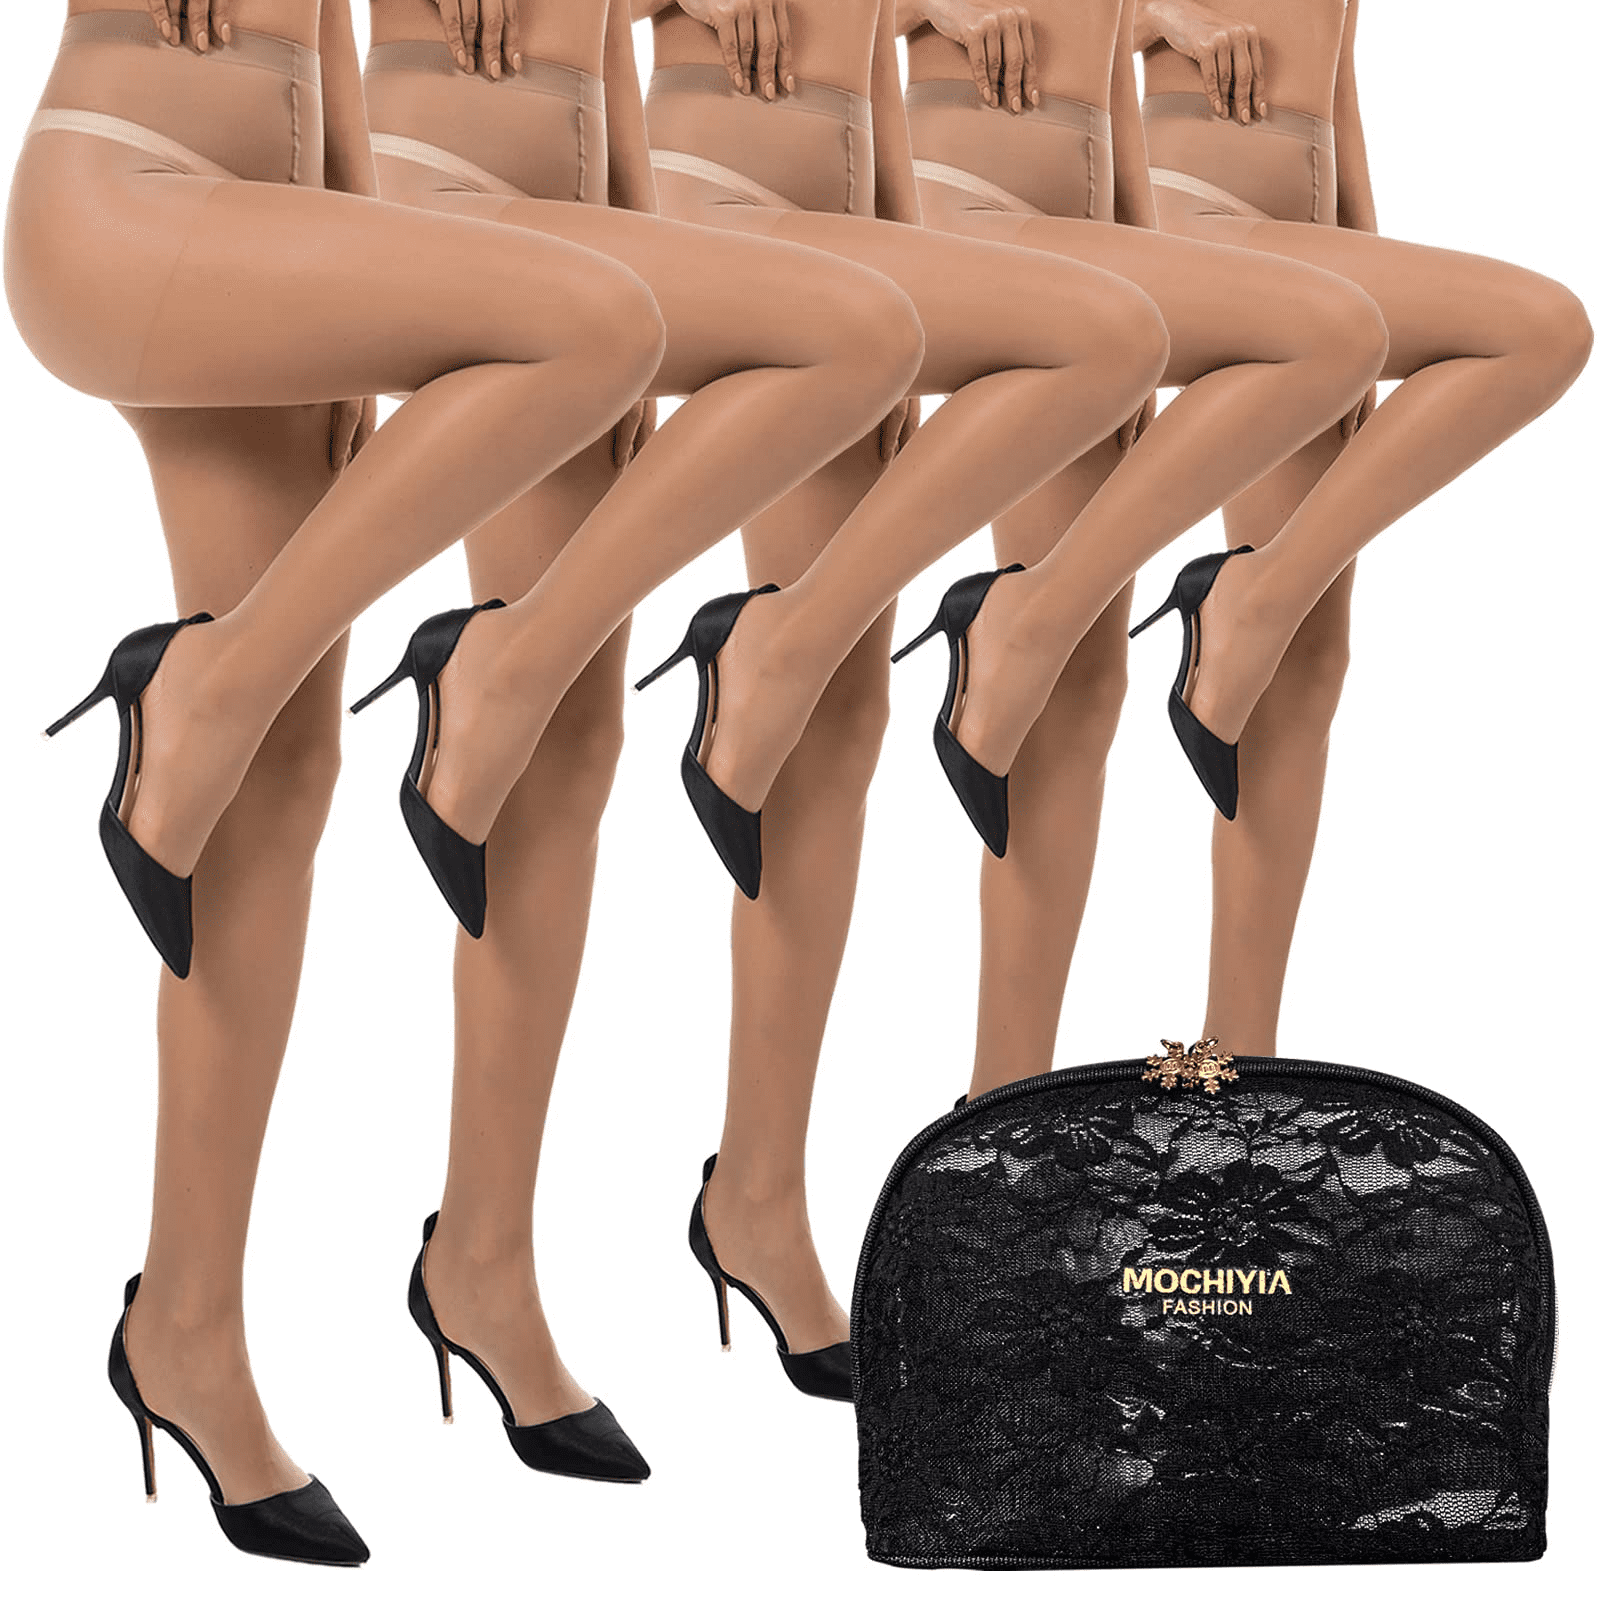 Calzitaly High Waist Tights Control Top Shaping Nylons, Shaping Pantyhose, 20 Denier Sheer Shaping Tights for All Day Use